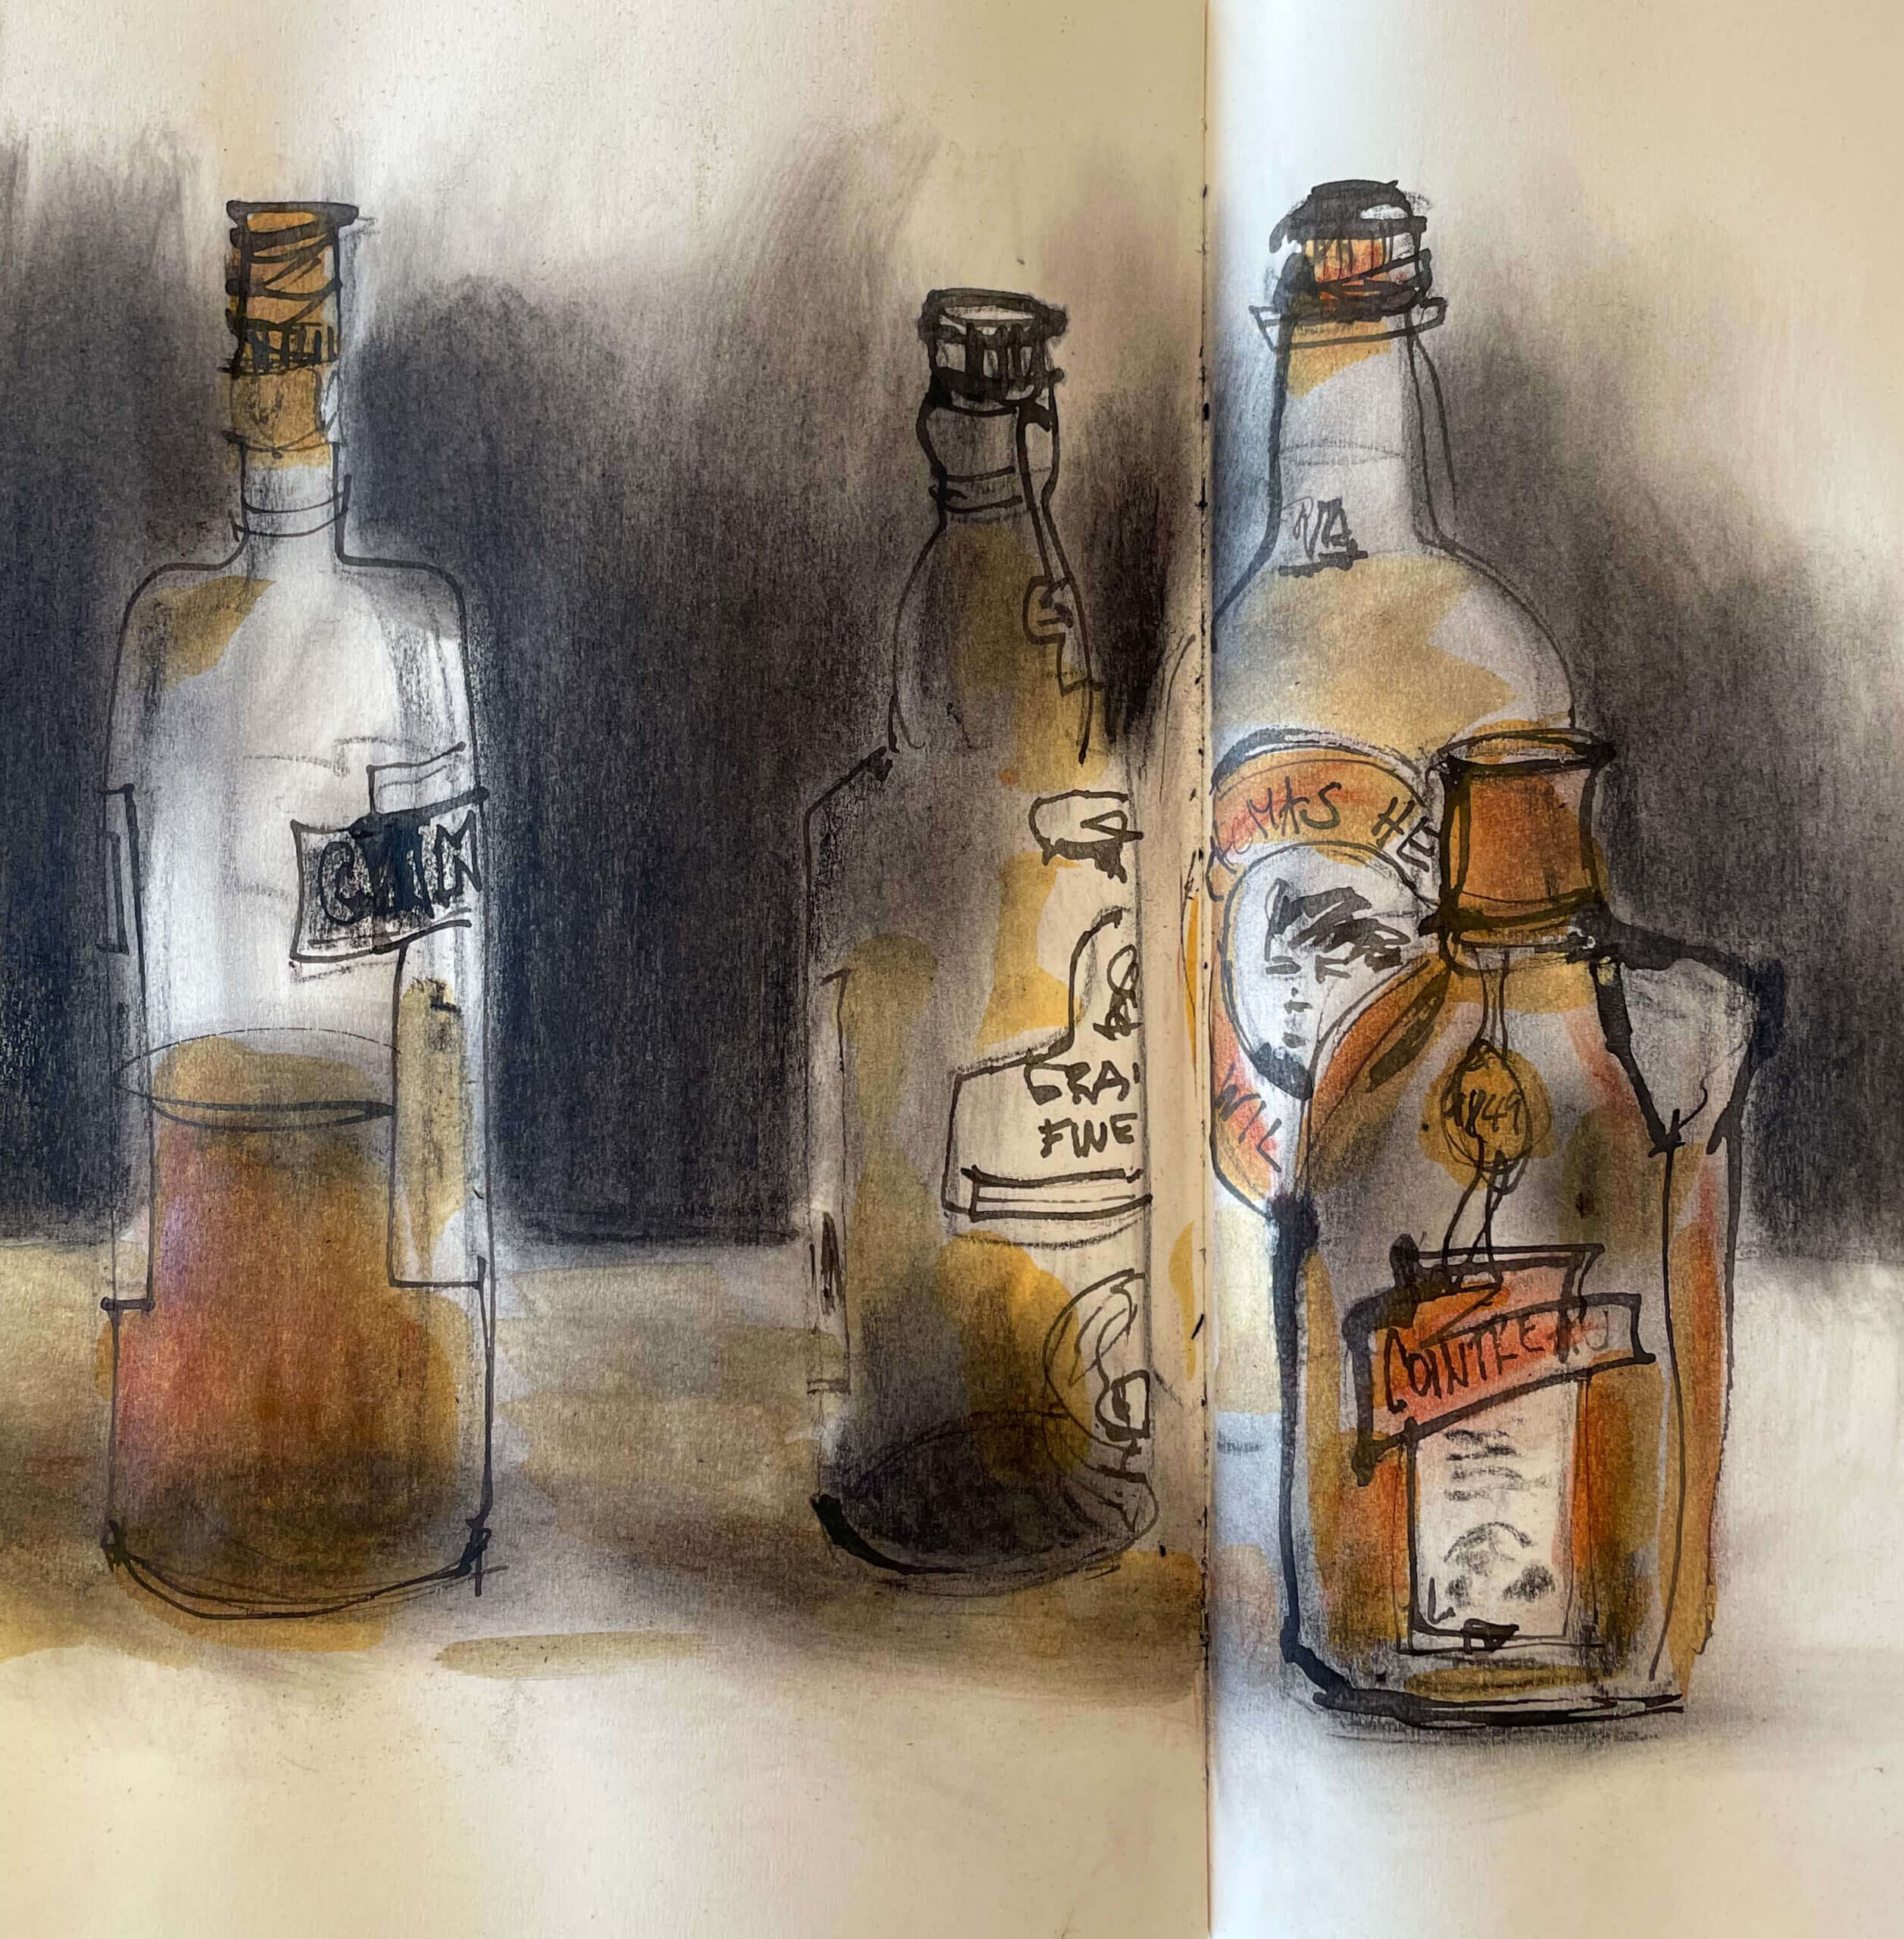 sketch done with pastel pencils showing bottles